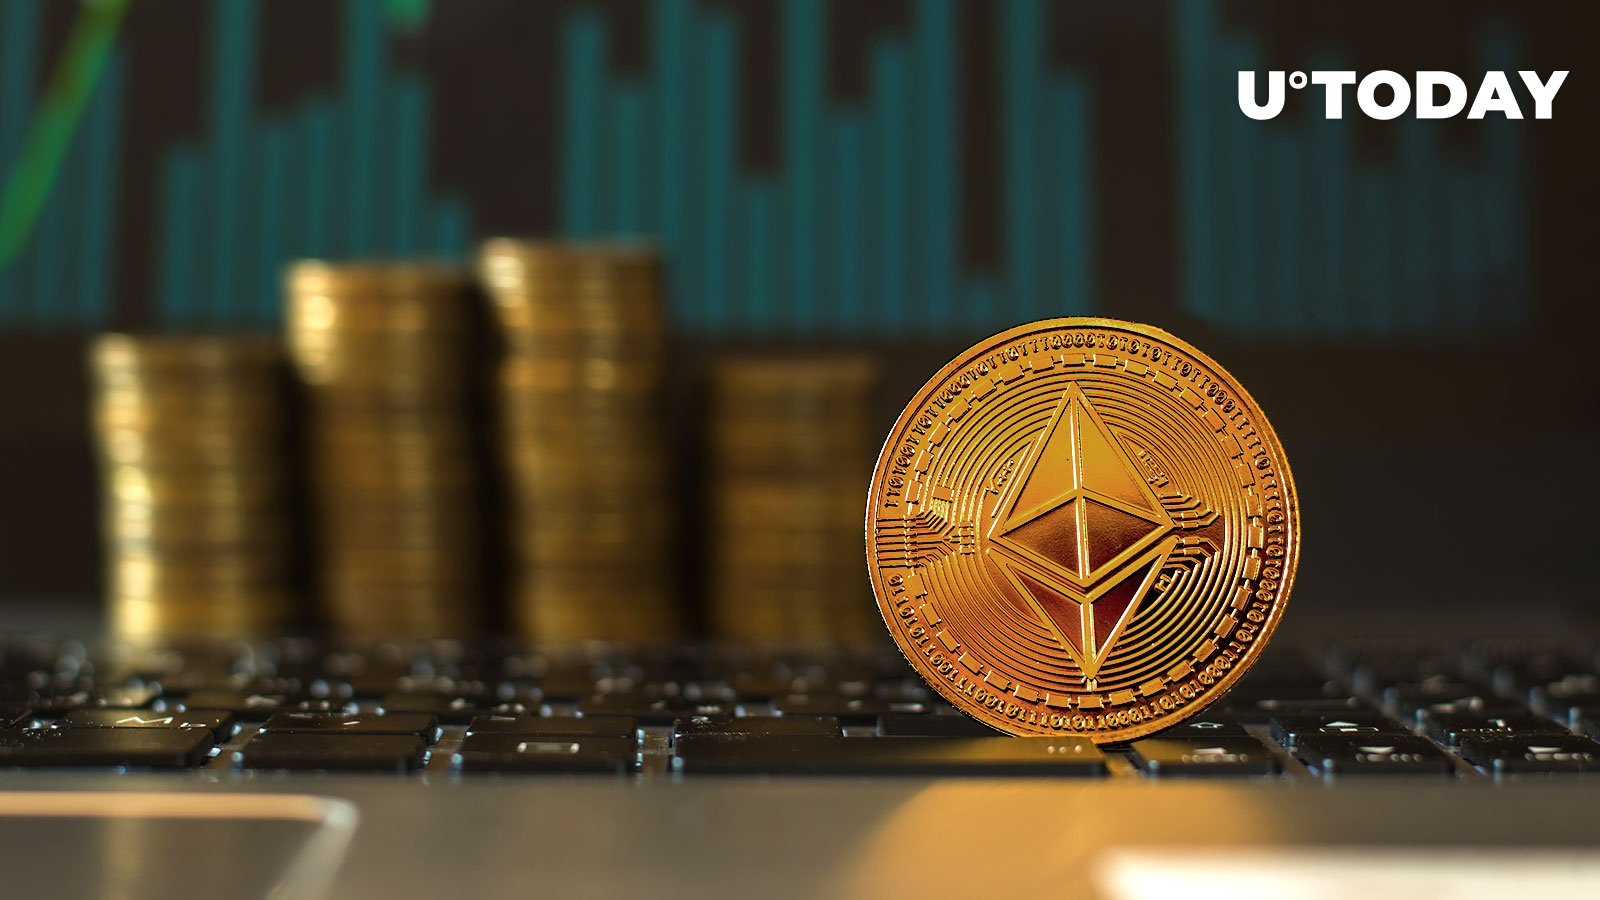 Ethereum Co-Founder Sends Massive Amount of Ether to Top Exchange